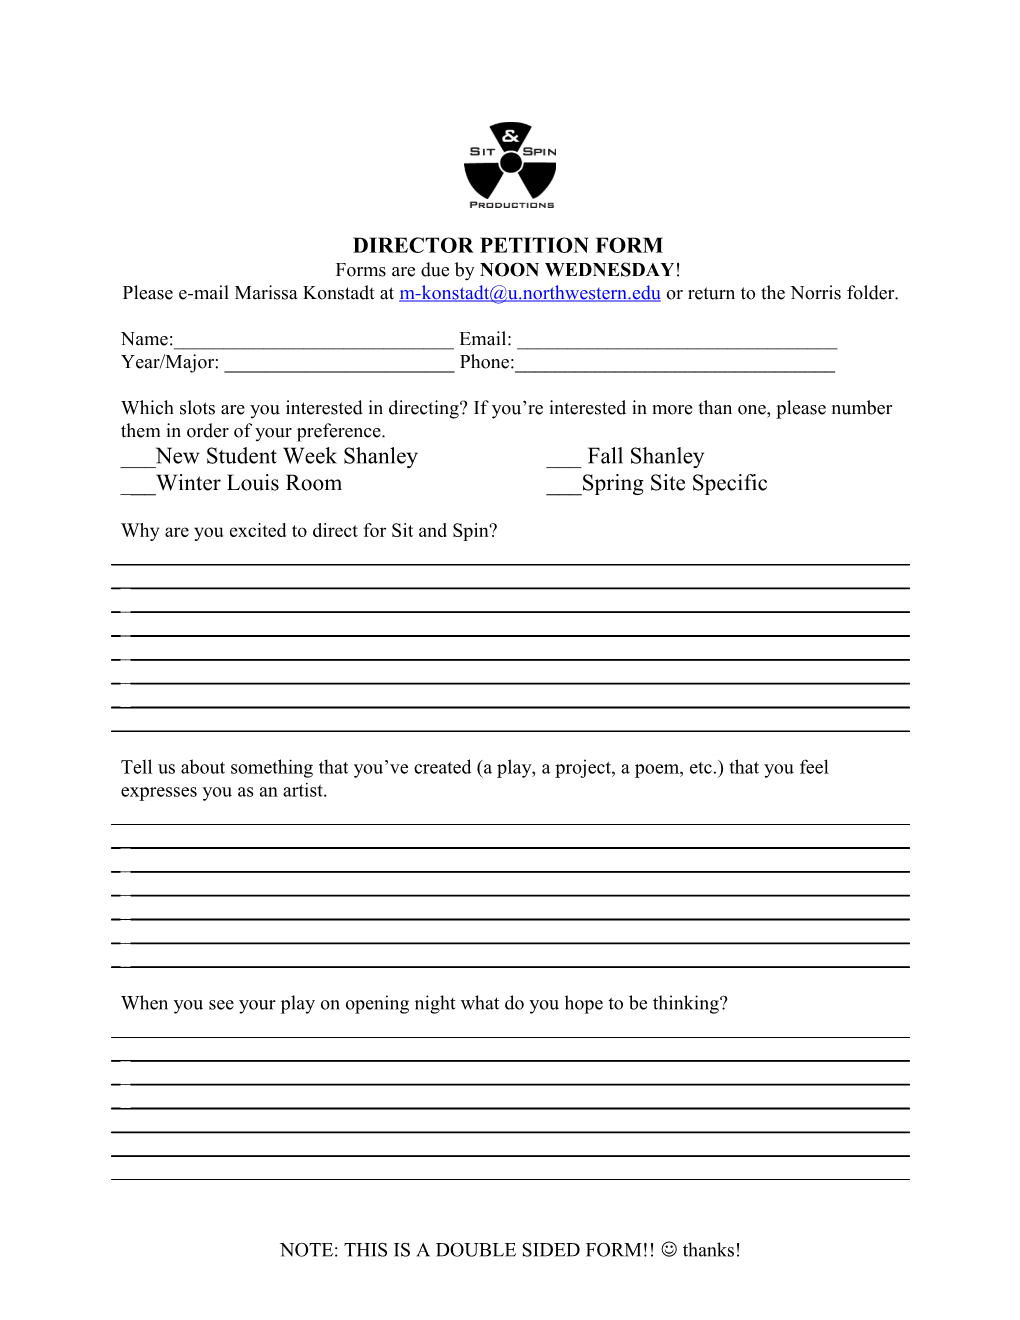 Director Petition Form